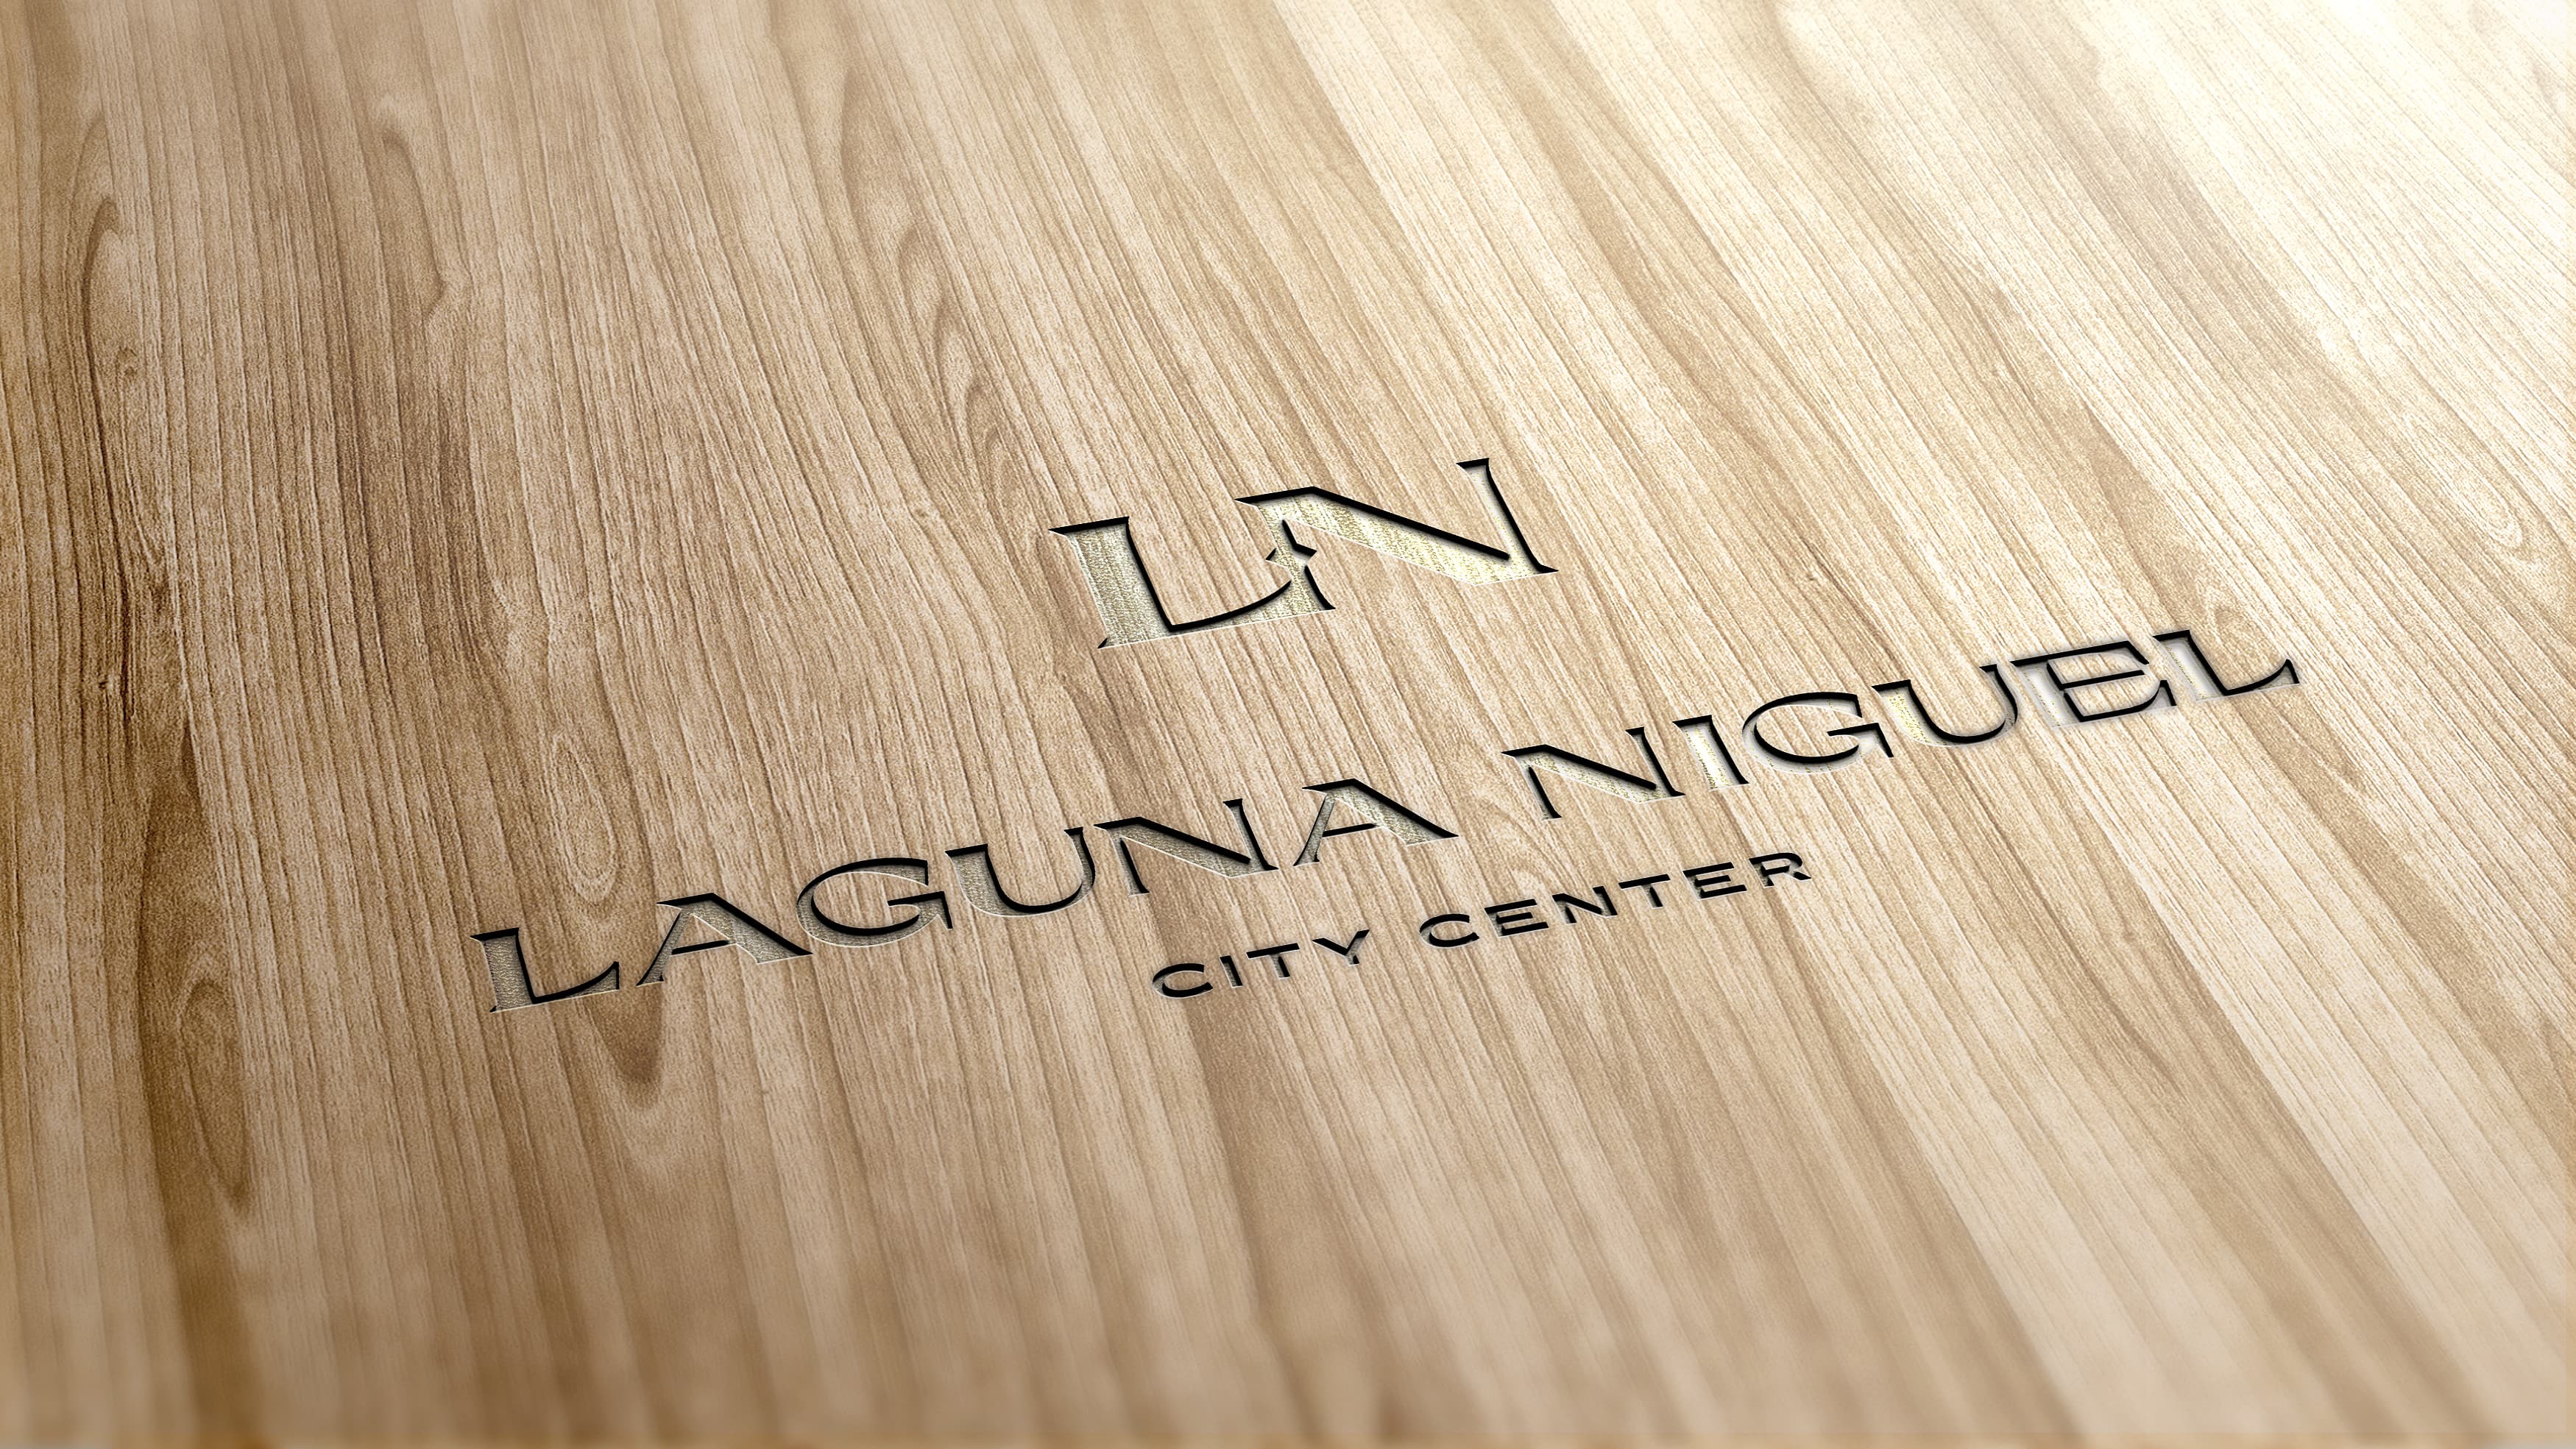 Laguna Niguel City Center logo engraved in a piece of natural wood.